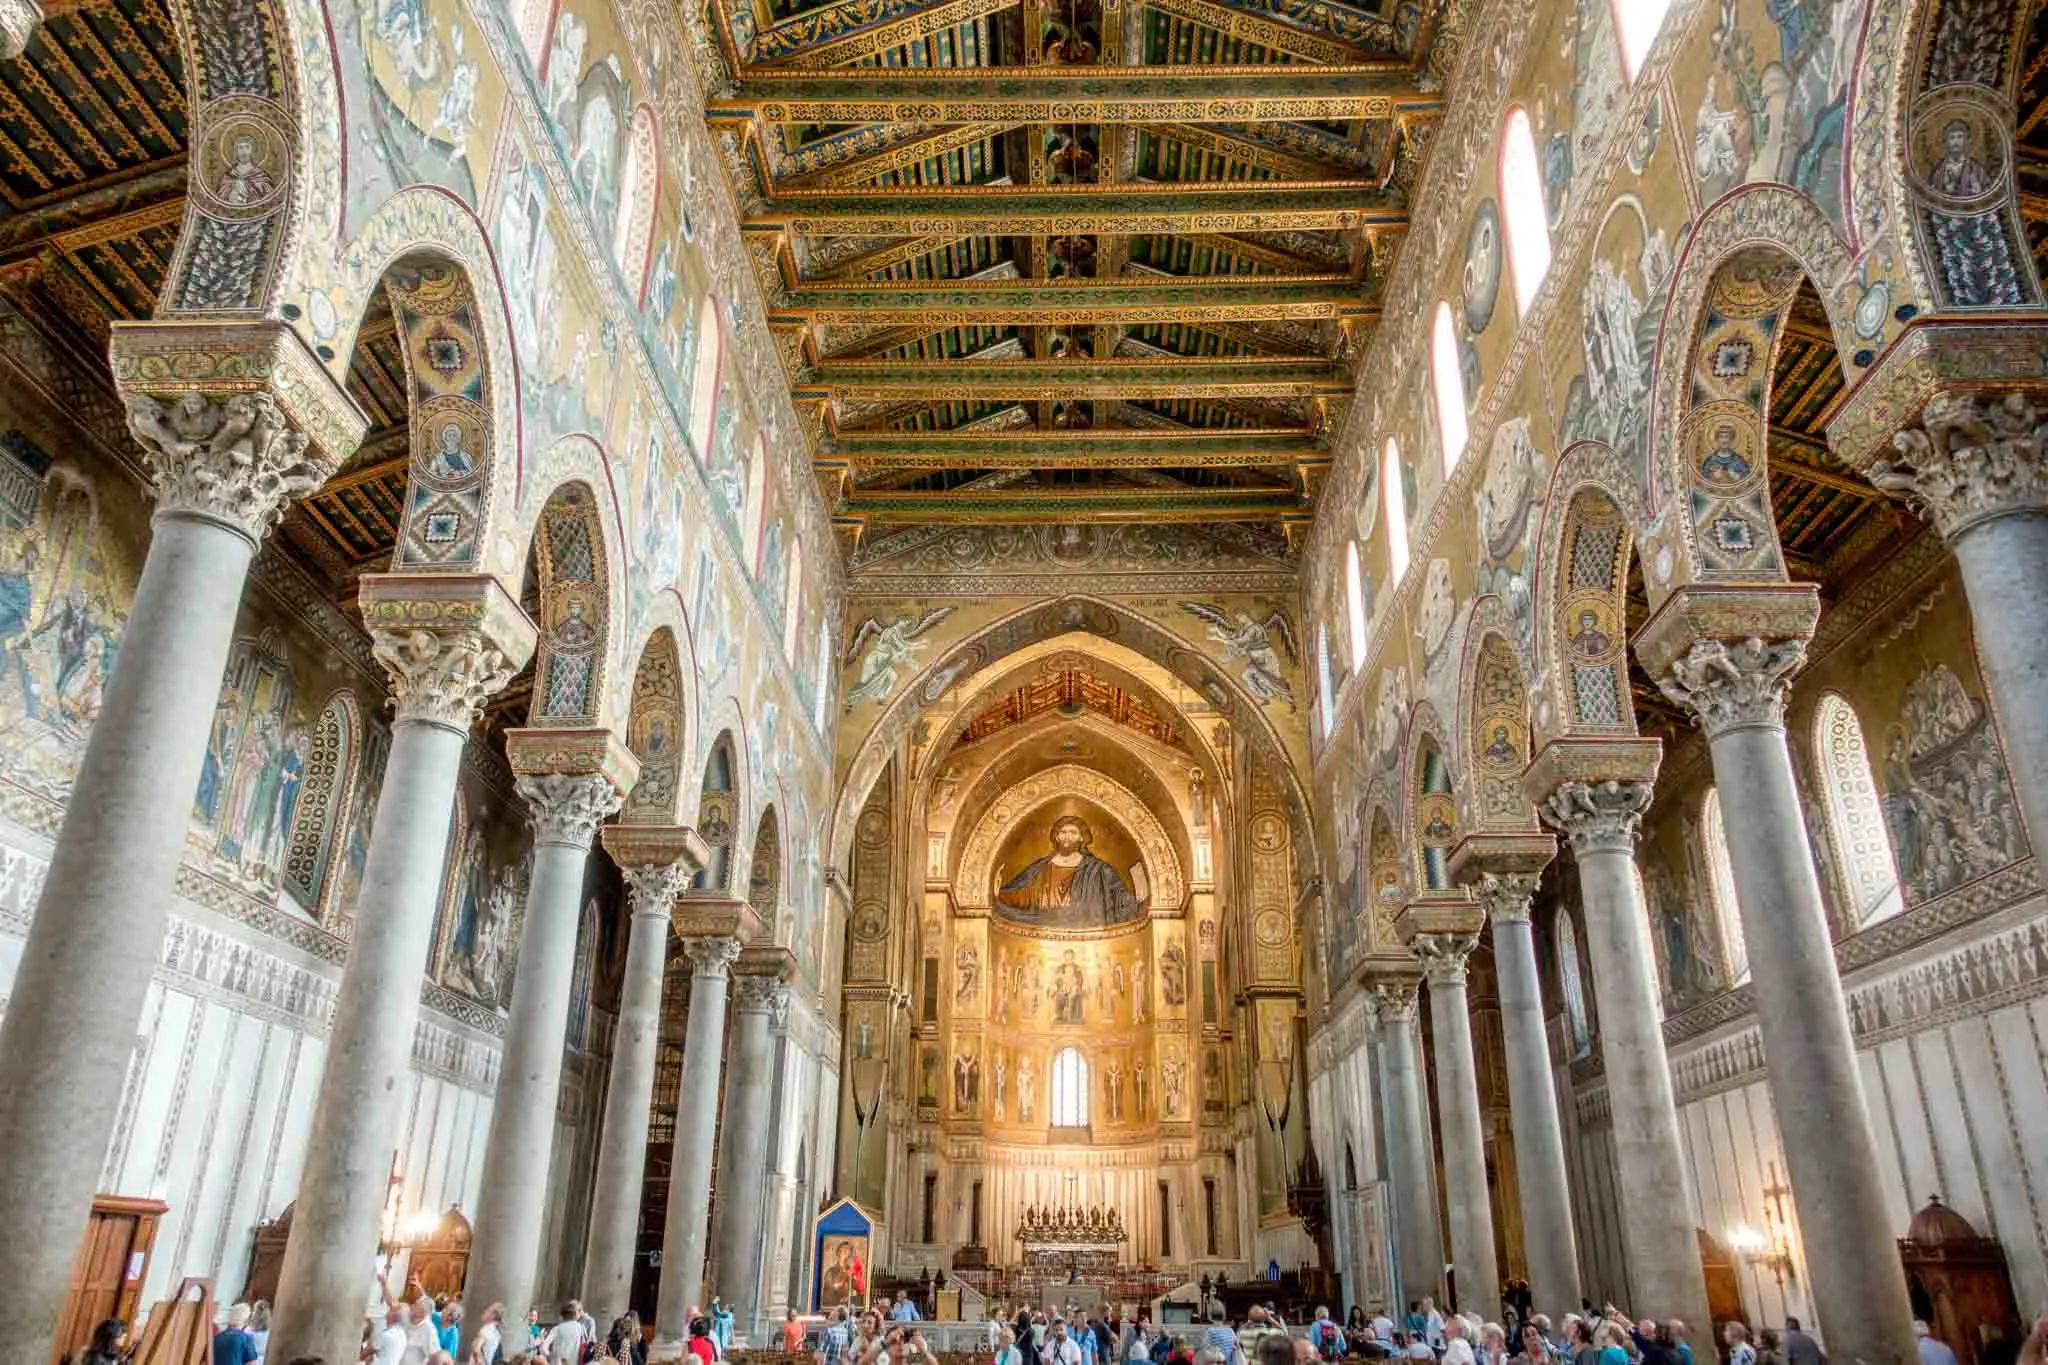 Interior of a cathedral decorated with gold mosaics